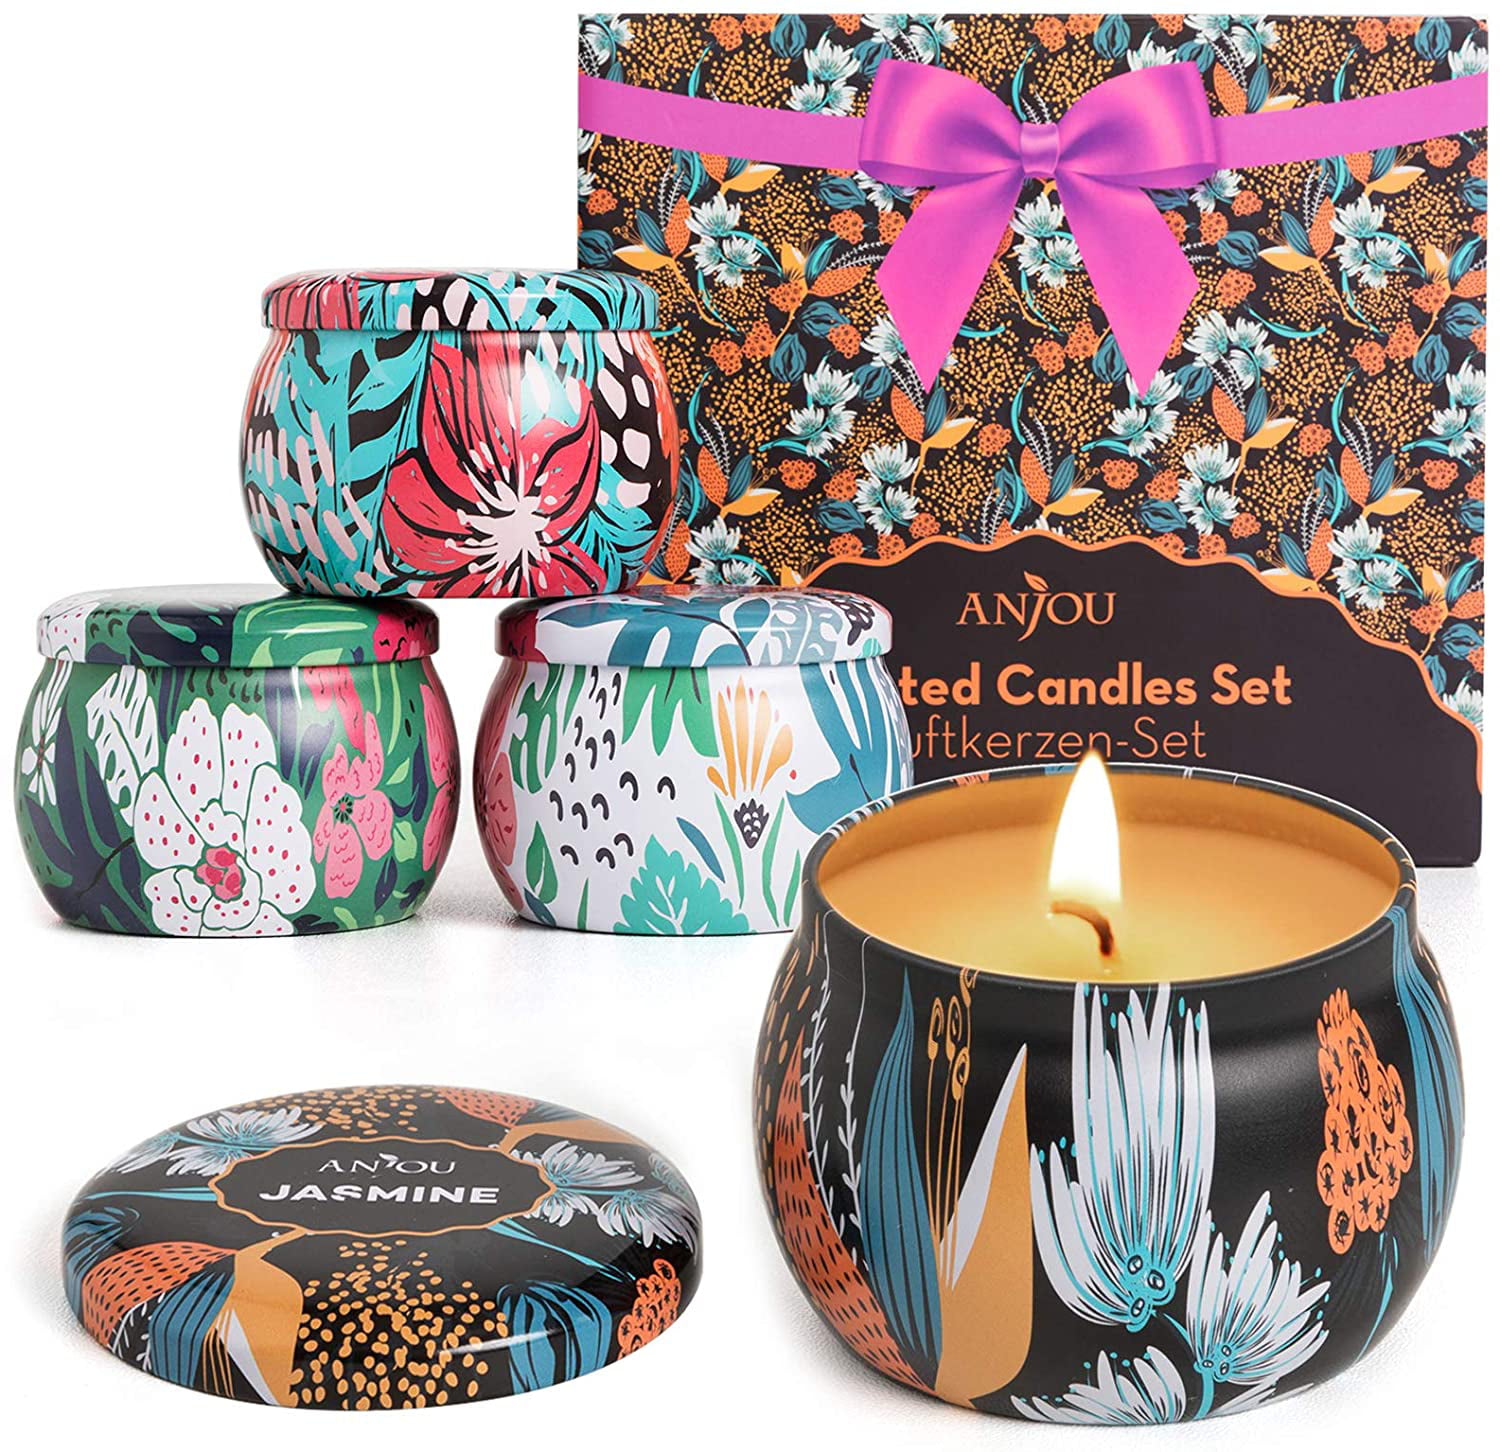 Scented Candles Gift Set 4 Cans Aromatherapy Candle 4.4 Oz Made of 100% Natural Soy Wax Portable Travel Tin Bath Yoga Unique Christmas Mothers Day Birthday Gifts for Women Wife Friends 